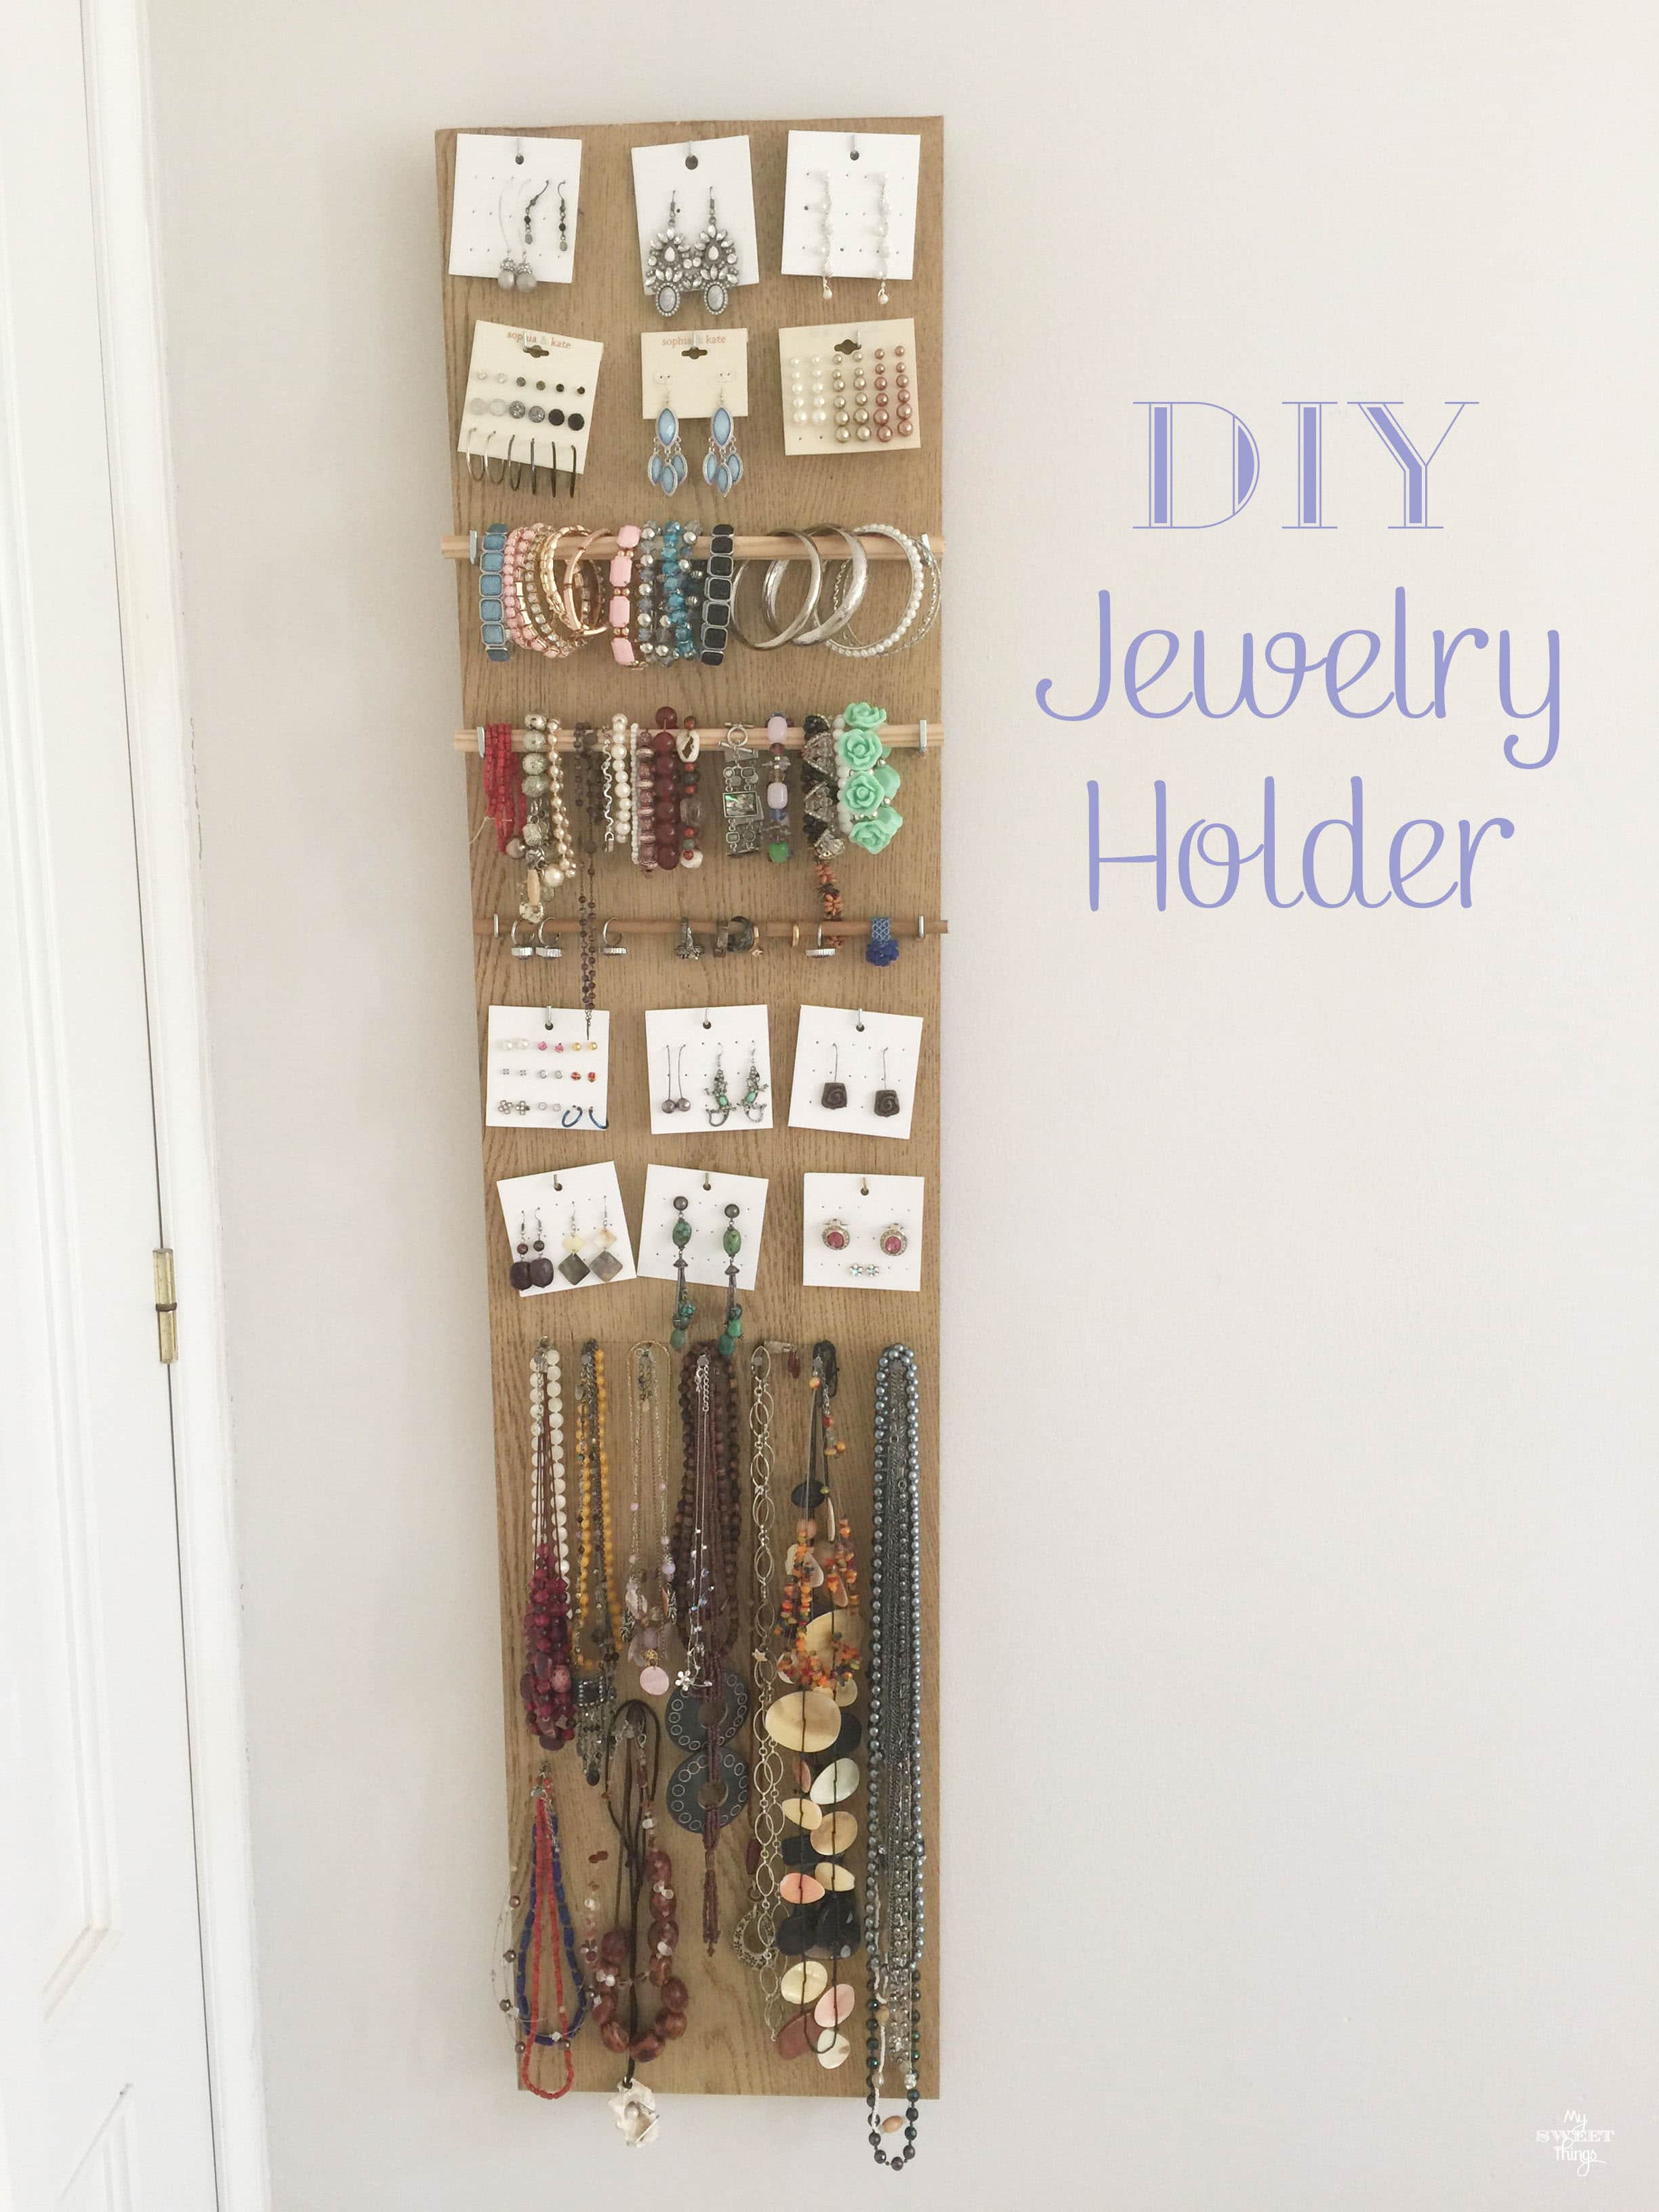 Easy and quick DIY jewelry holder out of scrap wood · Via www.sweethings.net